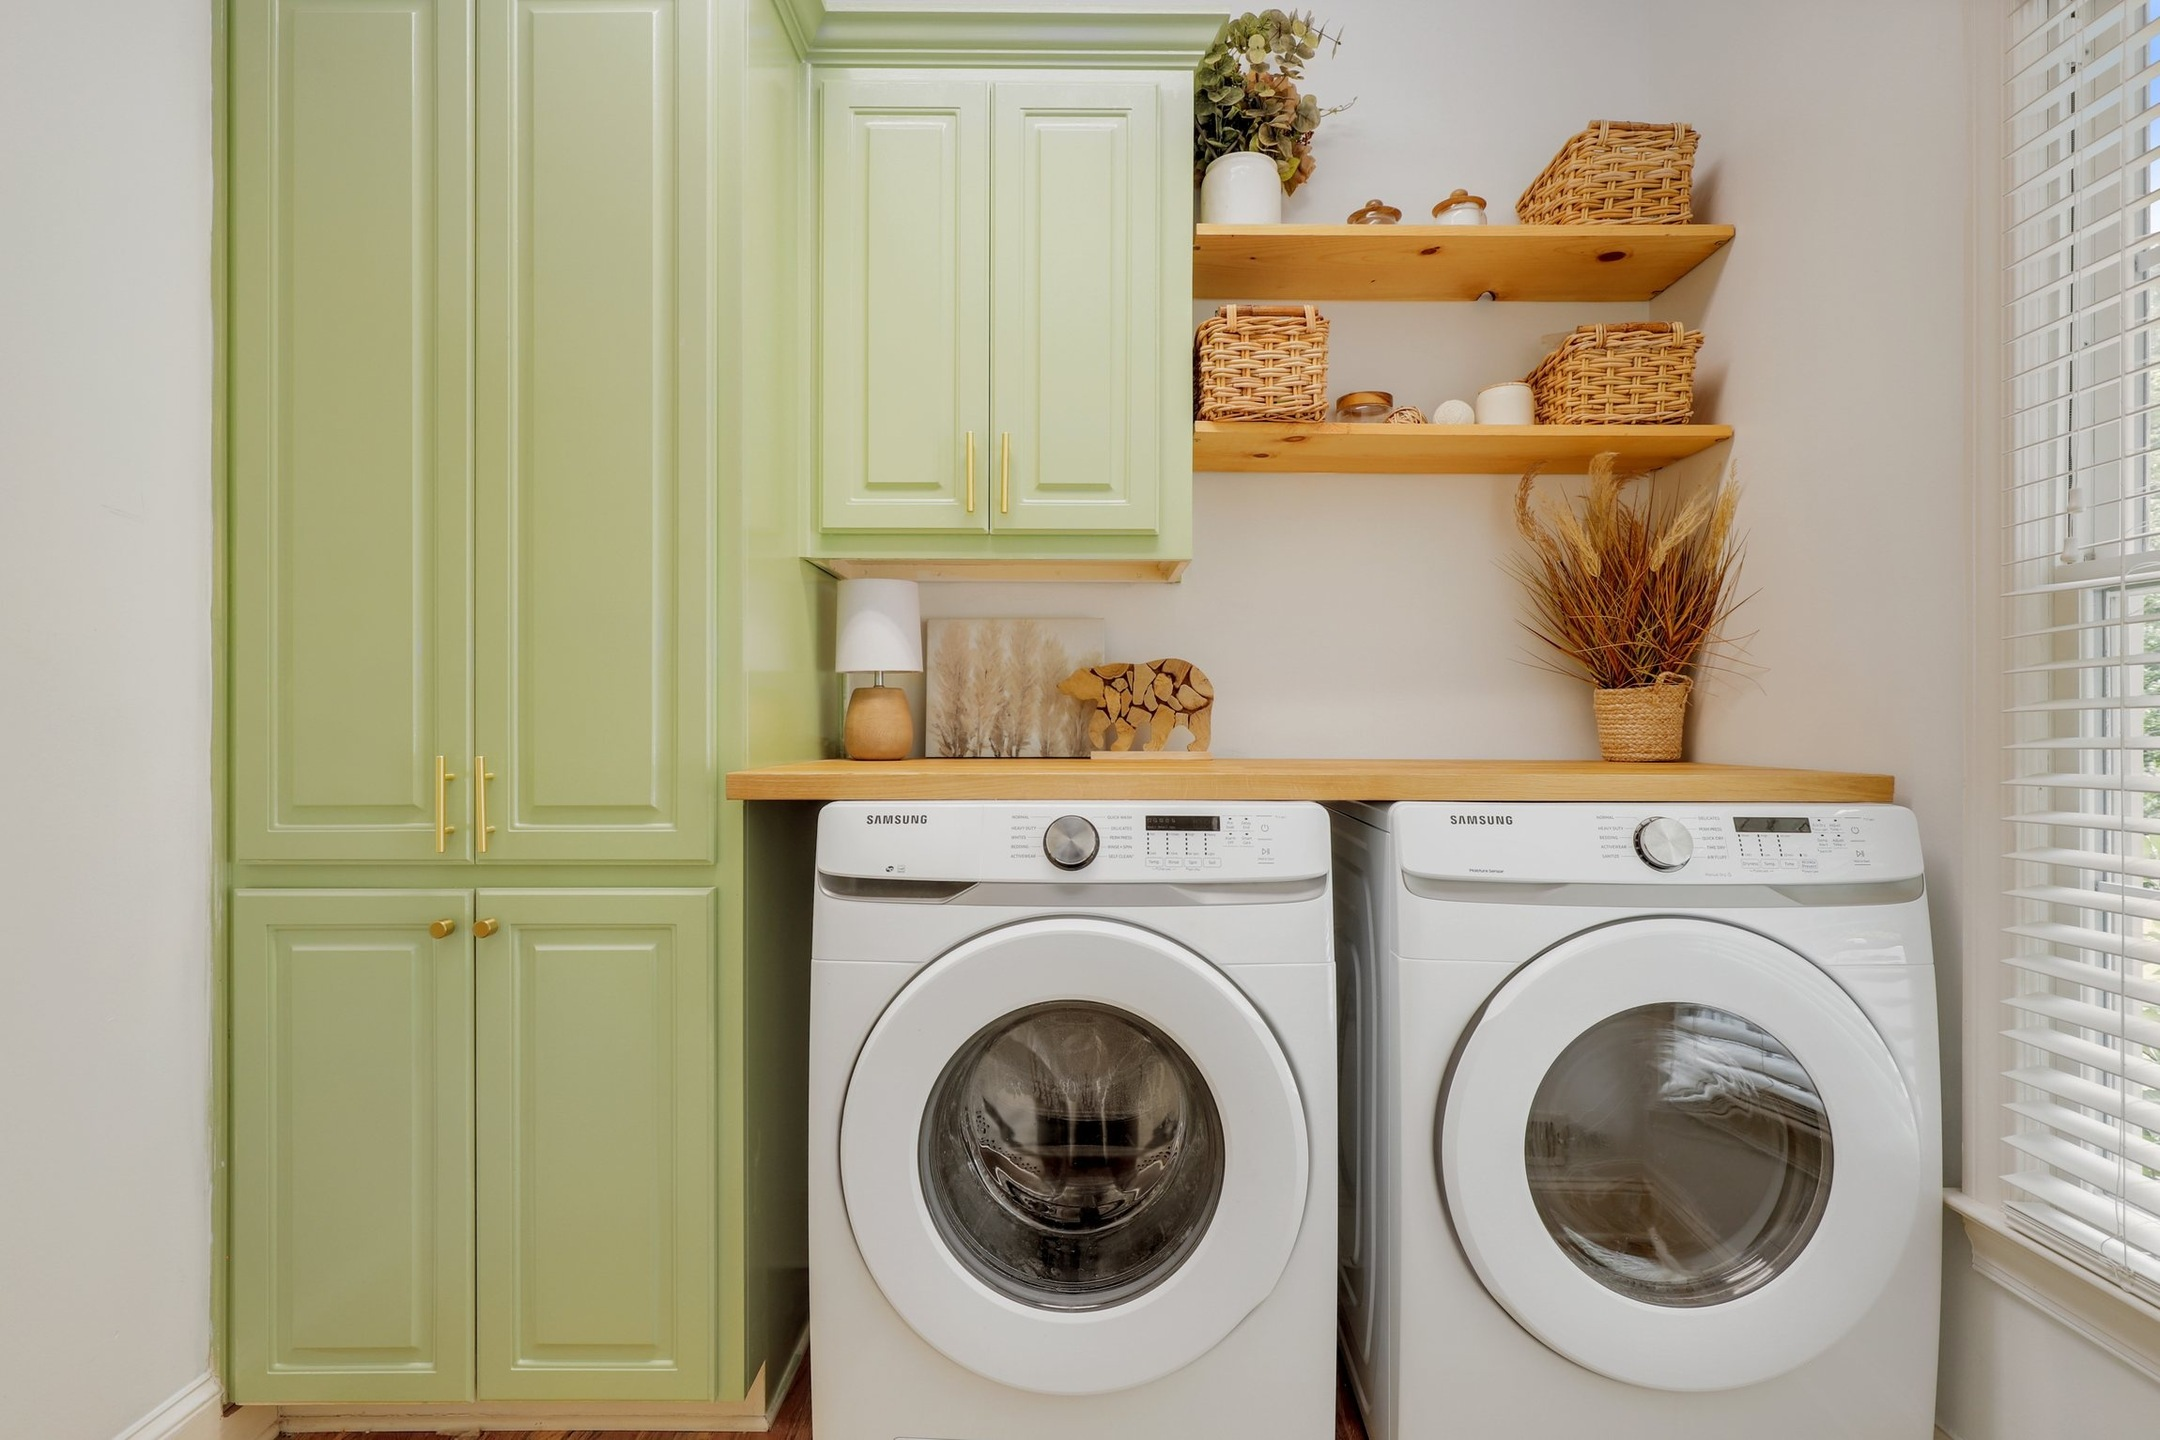 Washer and Dryer Solutions for Apartments Without Hookups - Survey 1 Inc